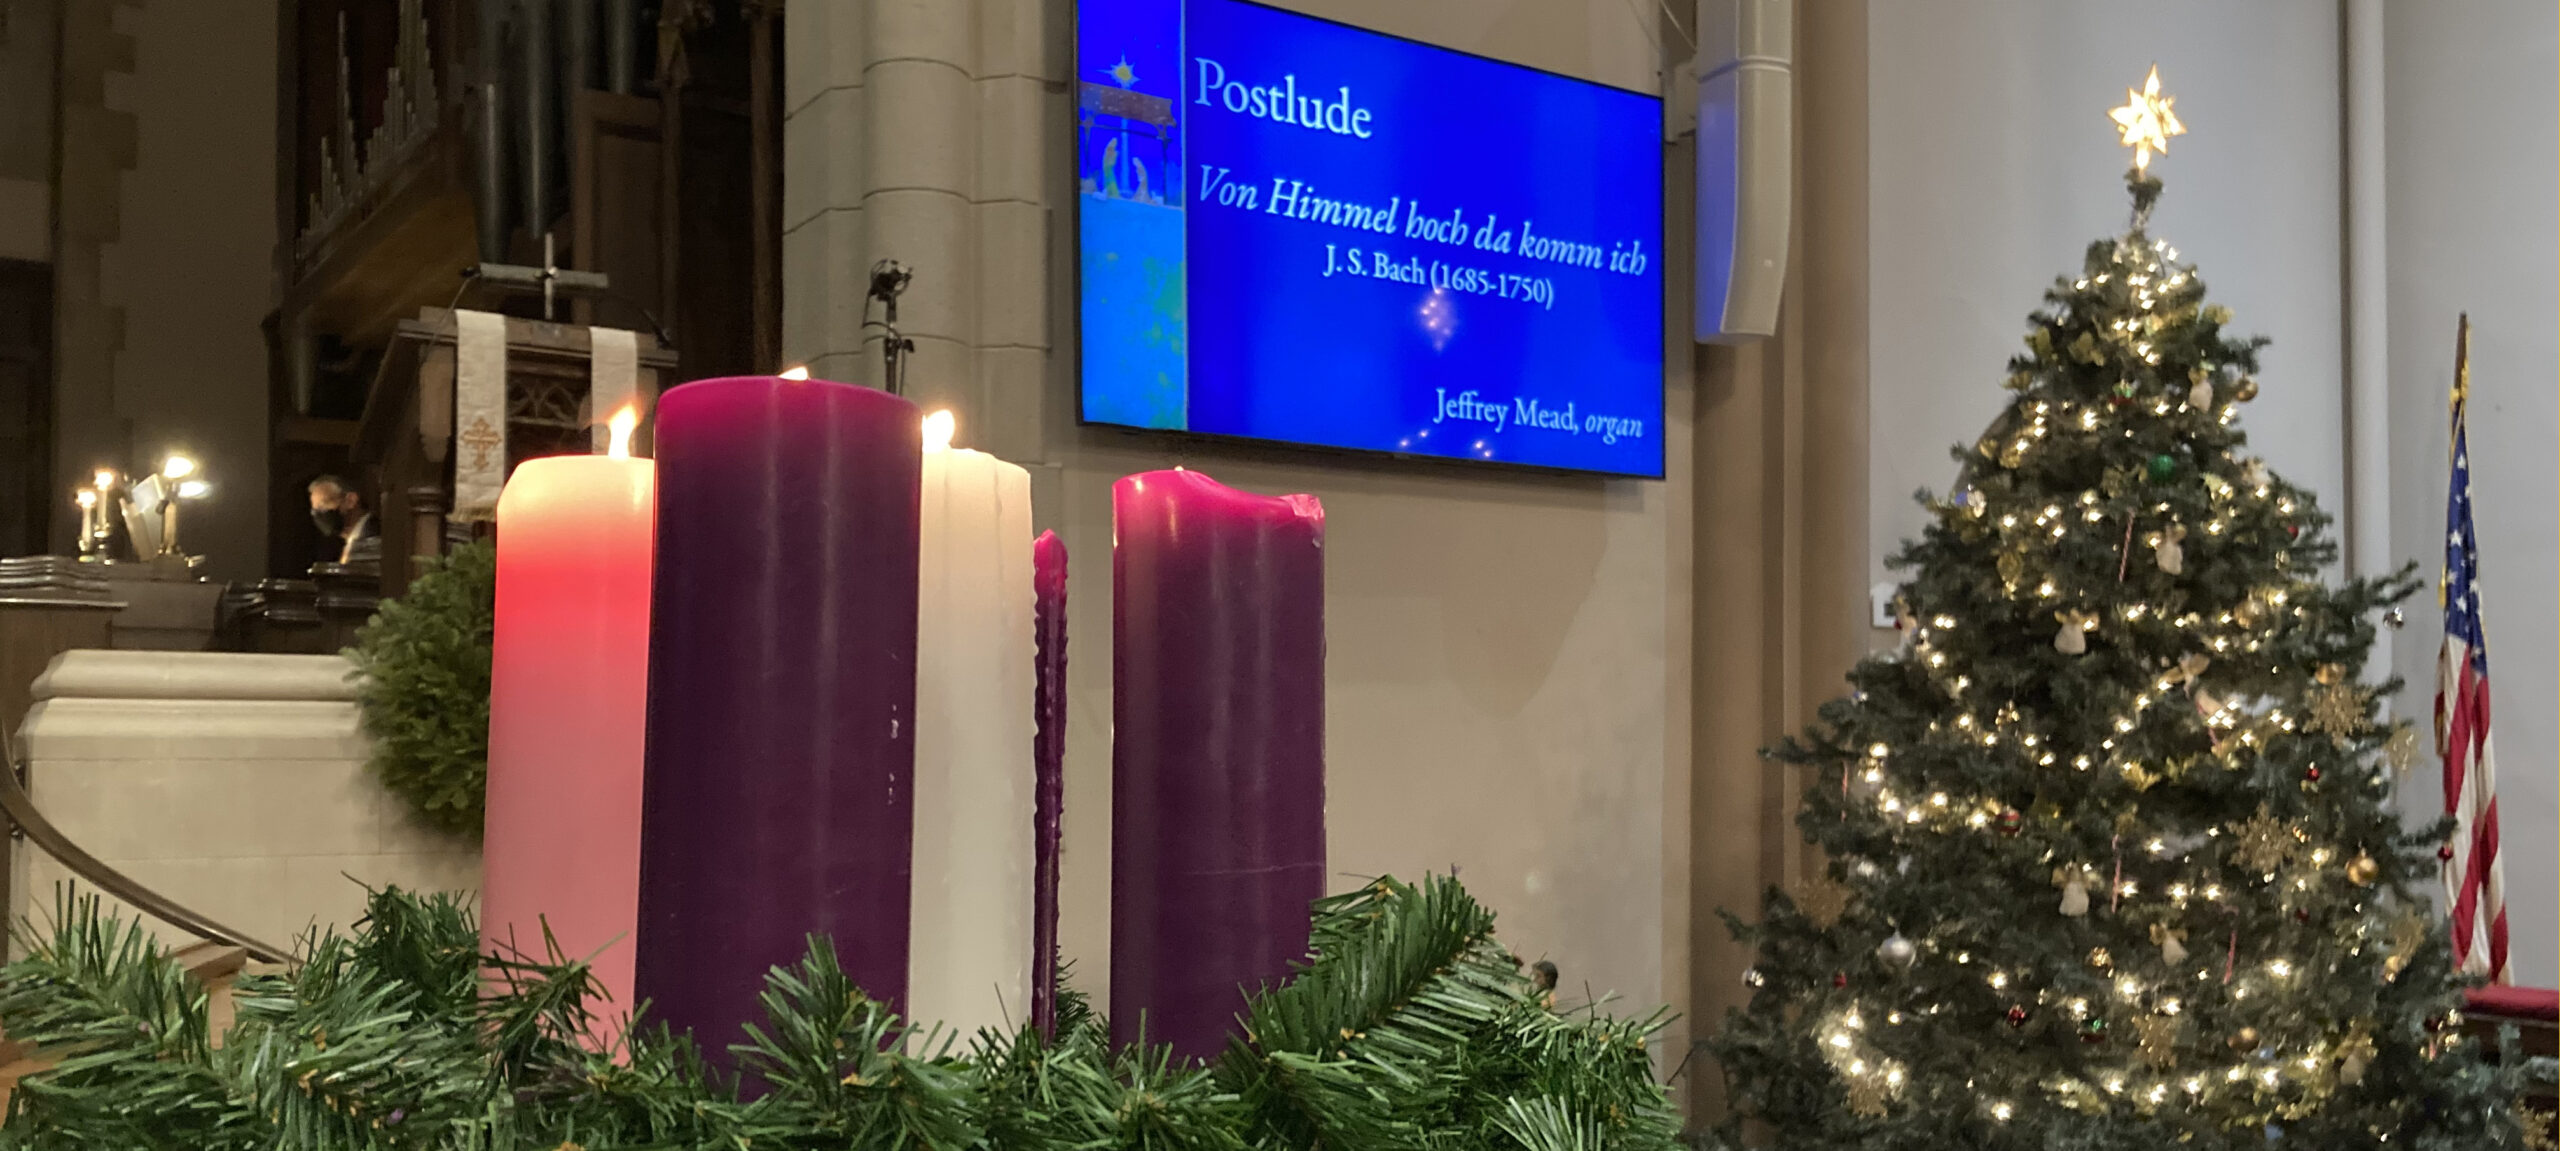 Join us for Worship during Advent, Sundays at 10 AM